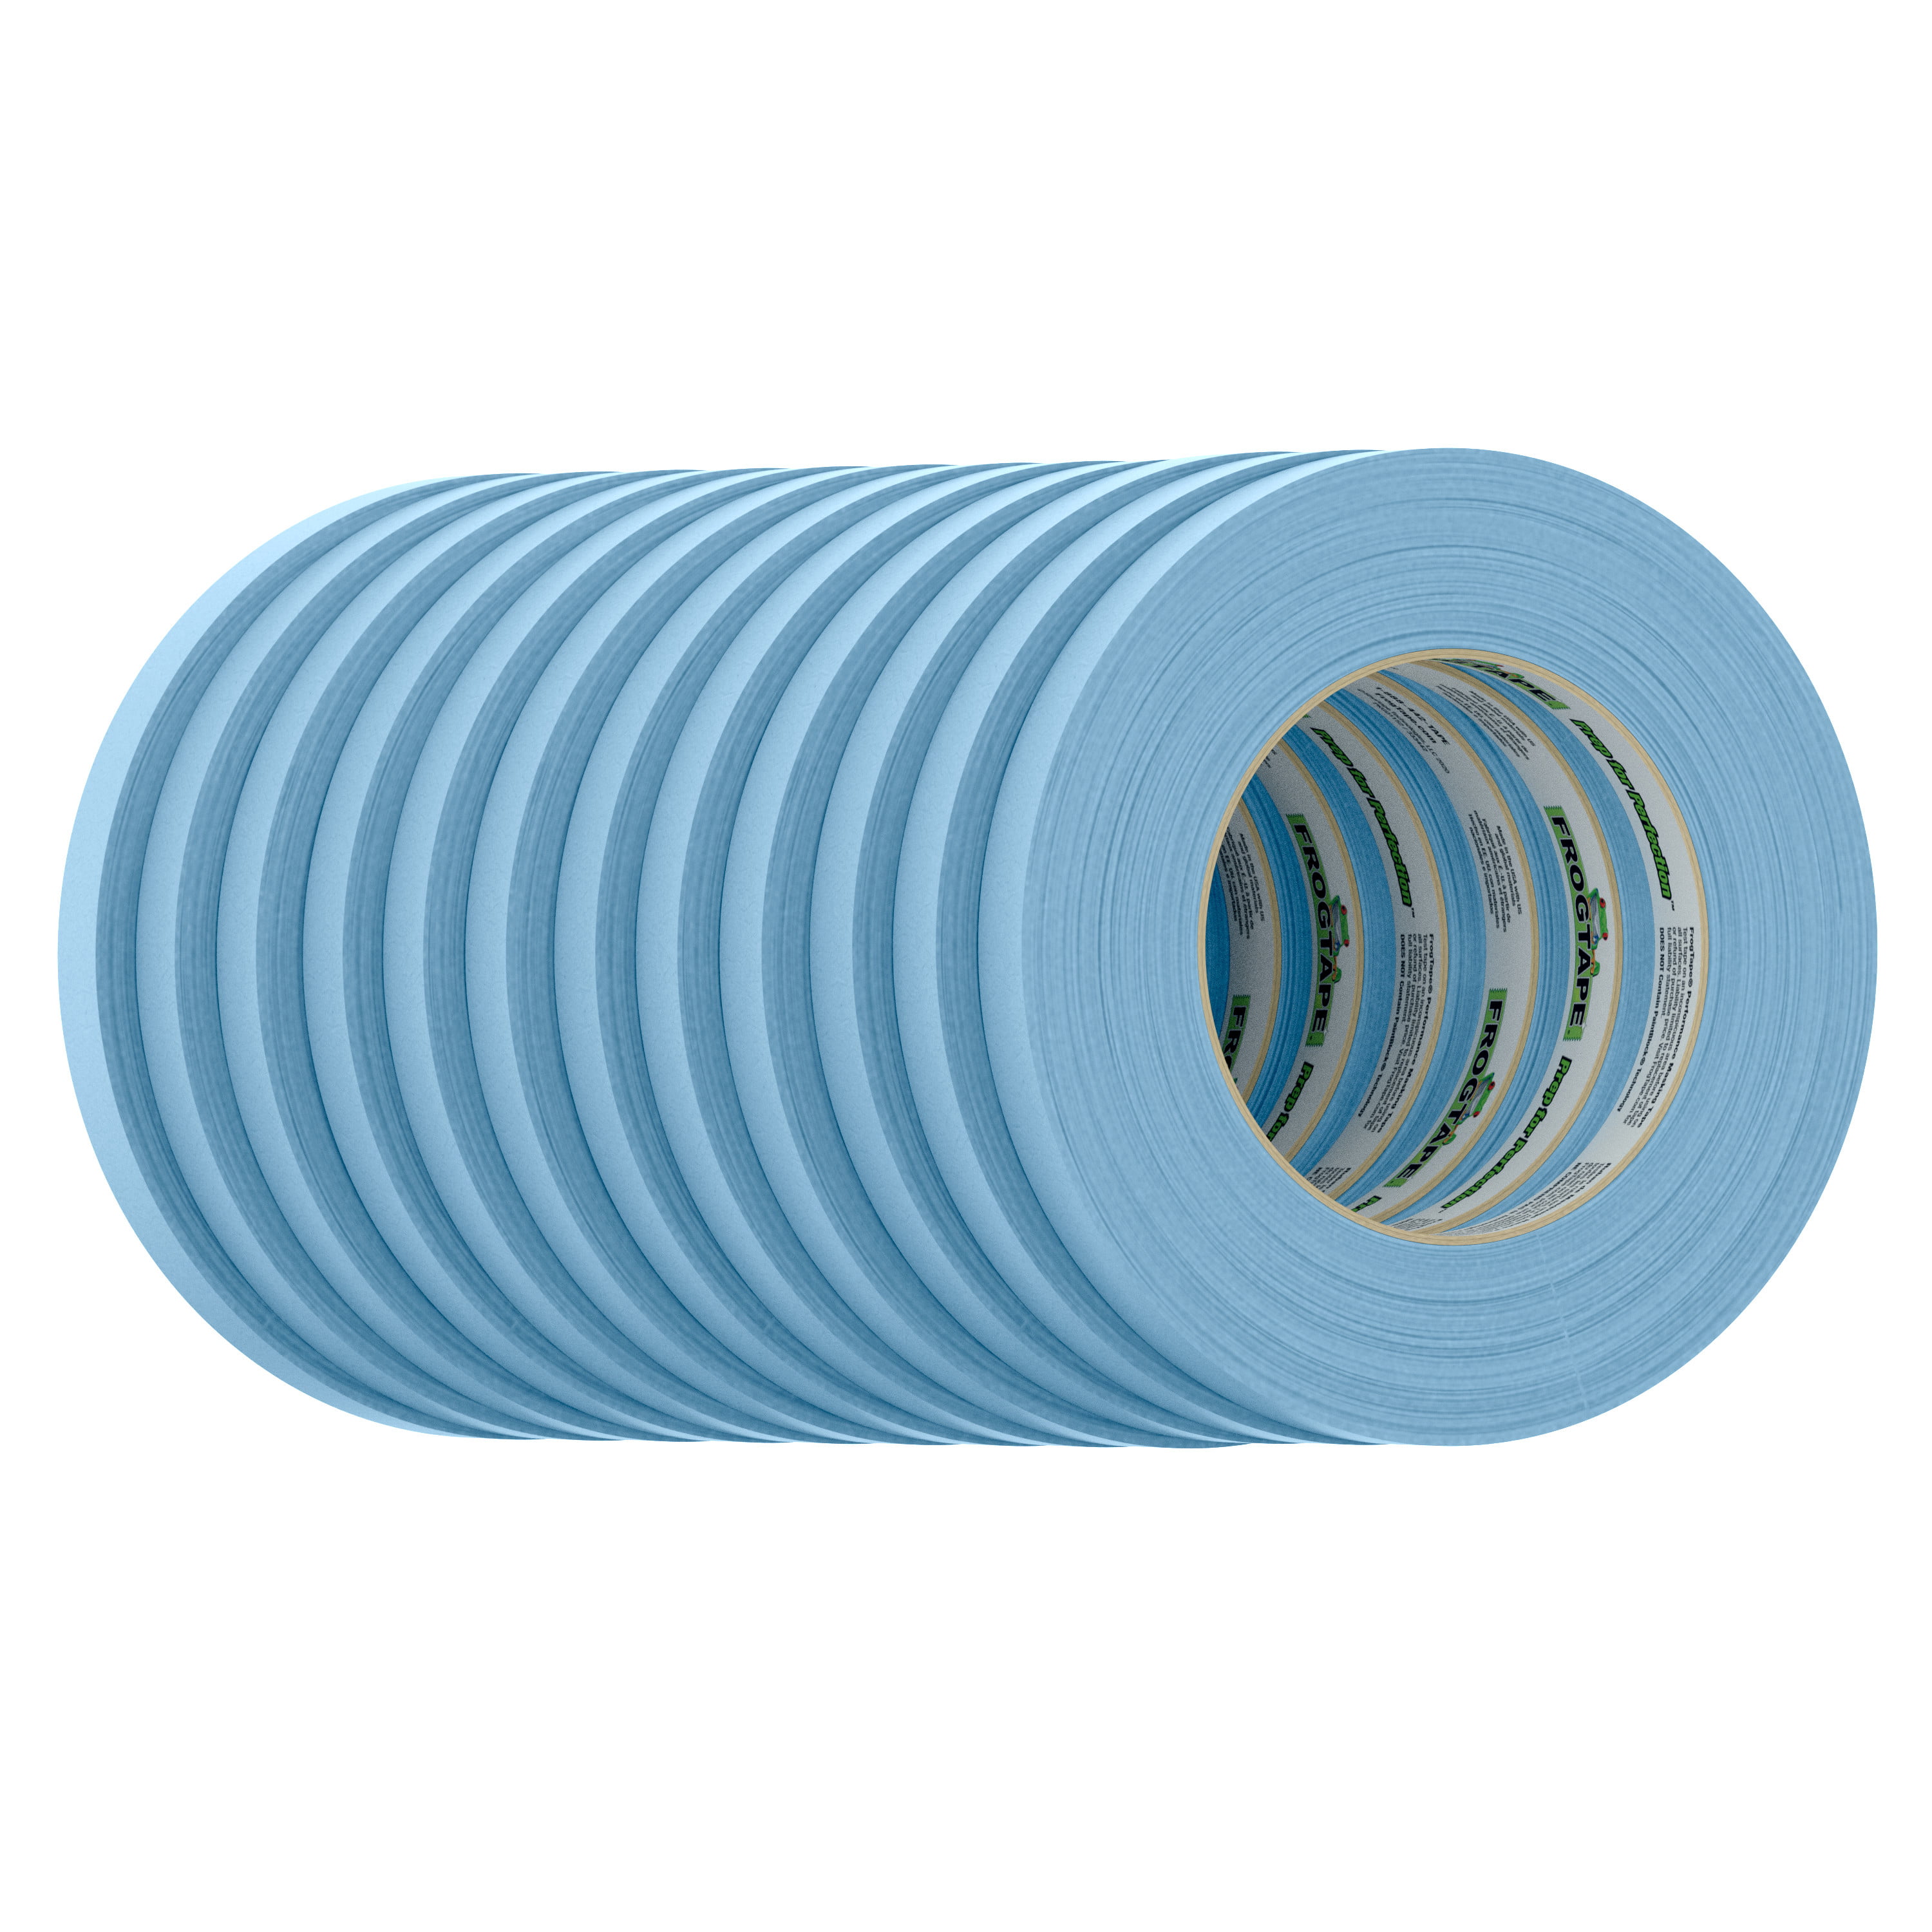 FrogTape® 250 Light Blue .47 in. x 60 yd. Moderate Temperature Performance  Masking Tape, 12 Rolls